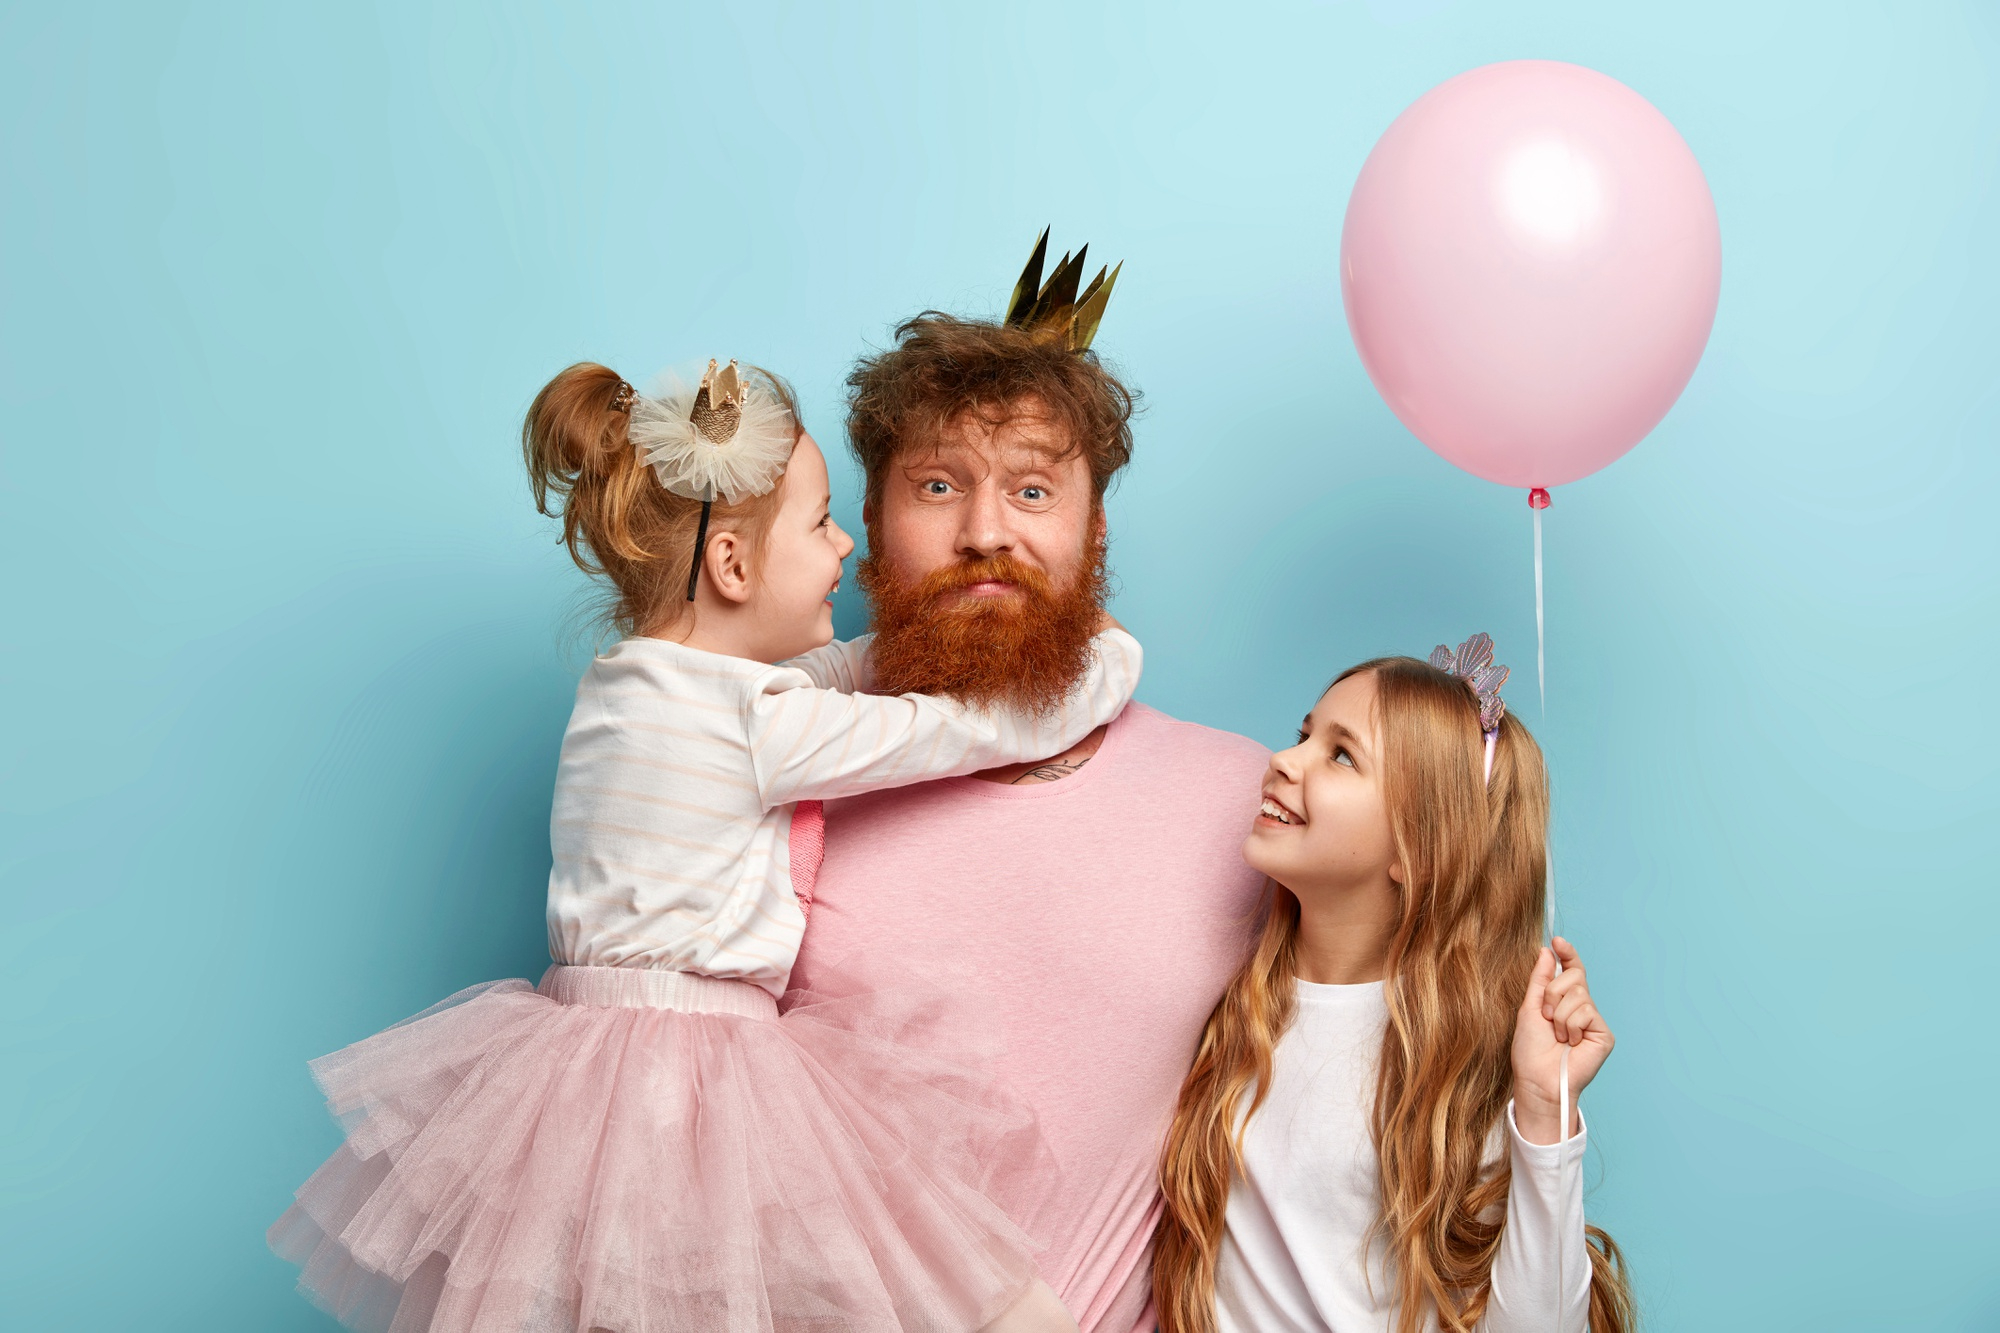 A father dressed in a tiara with his girls | Source: Freepik